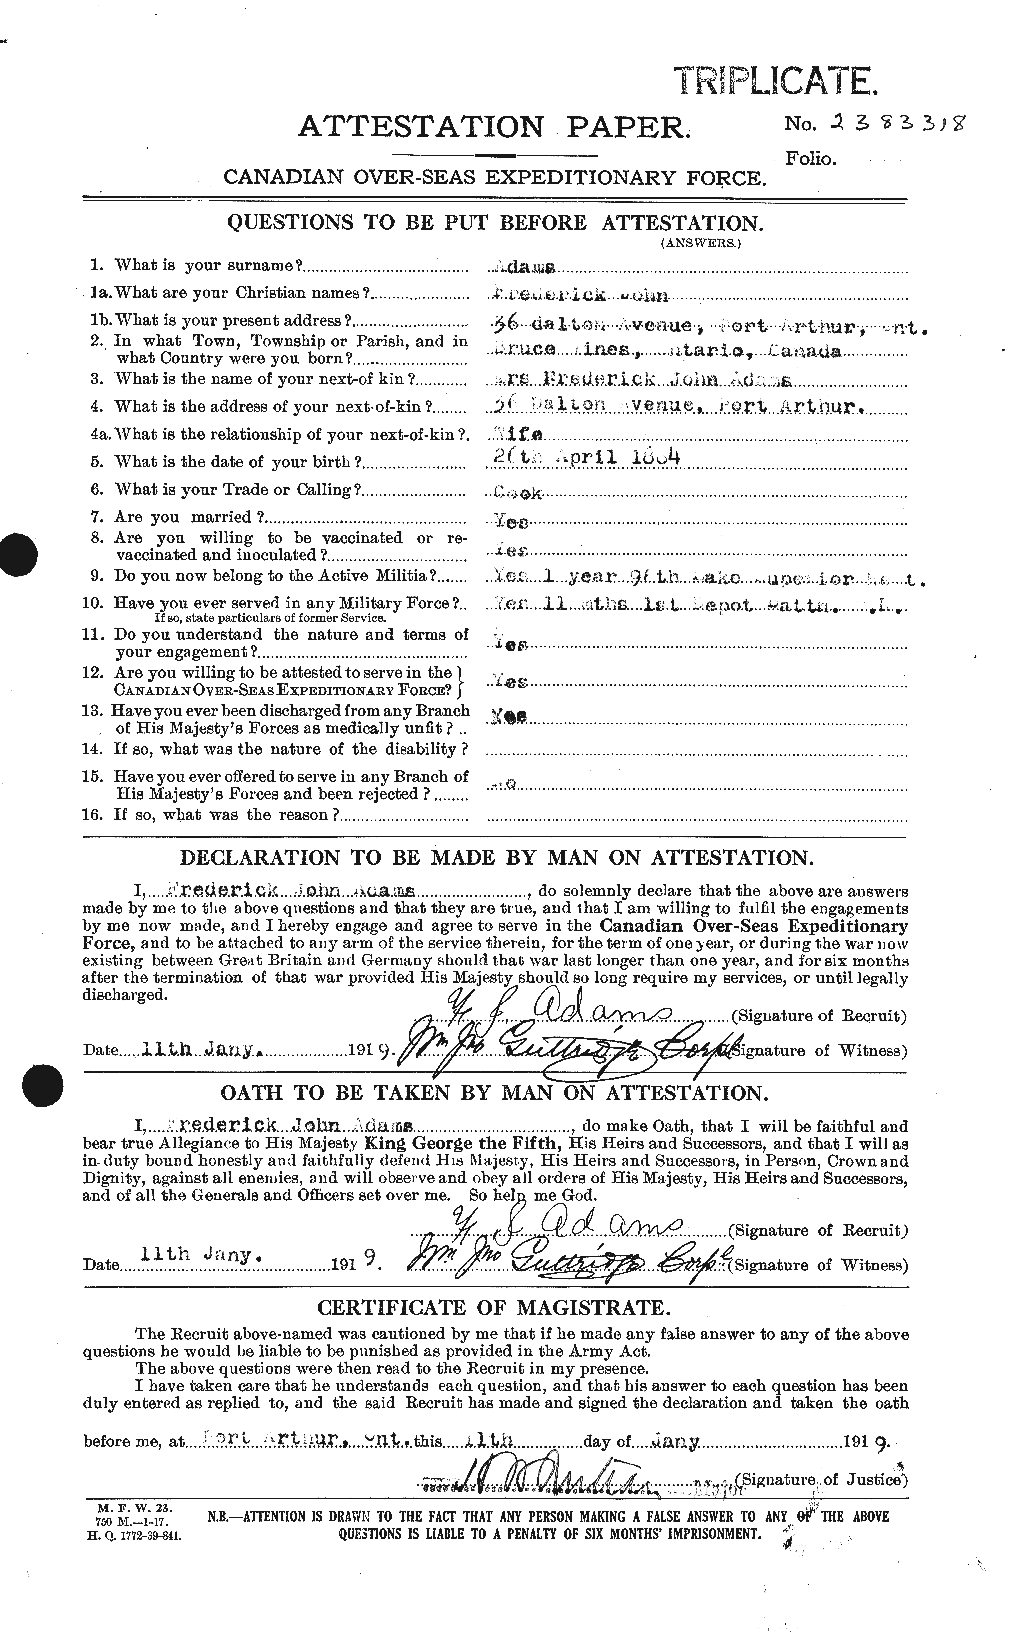 Personnel Records of the First World War - CEF 202698a